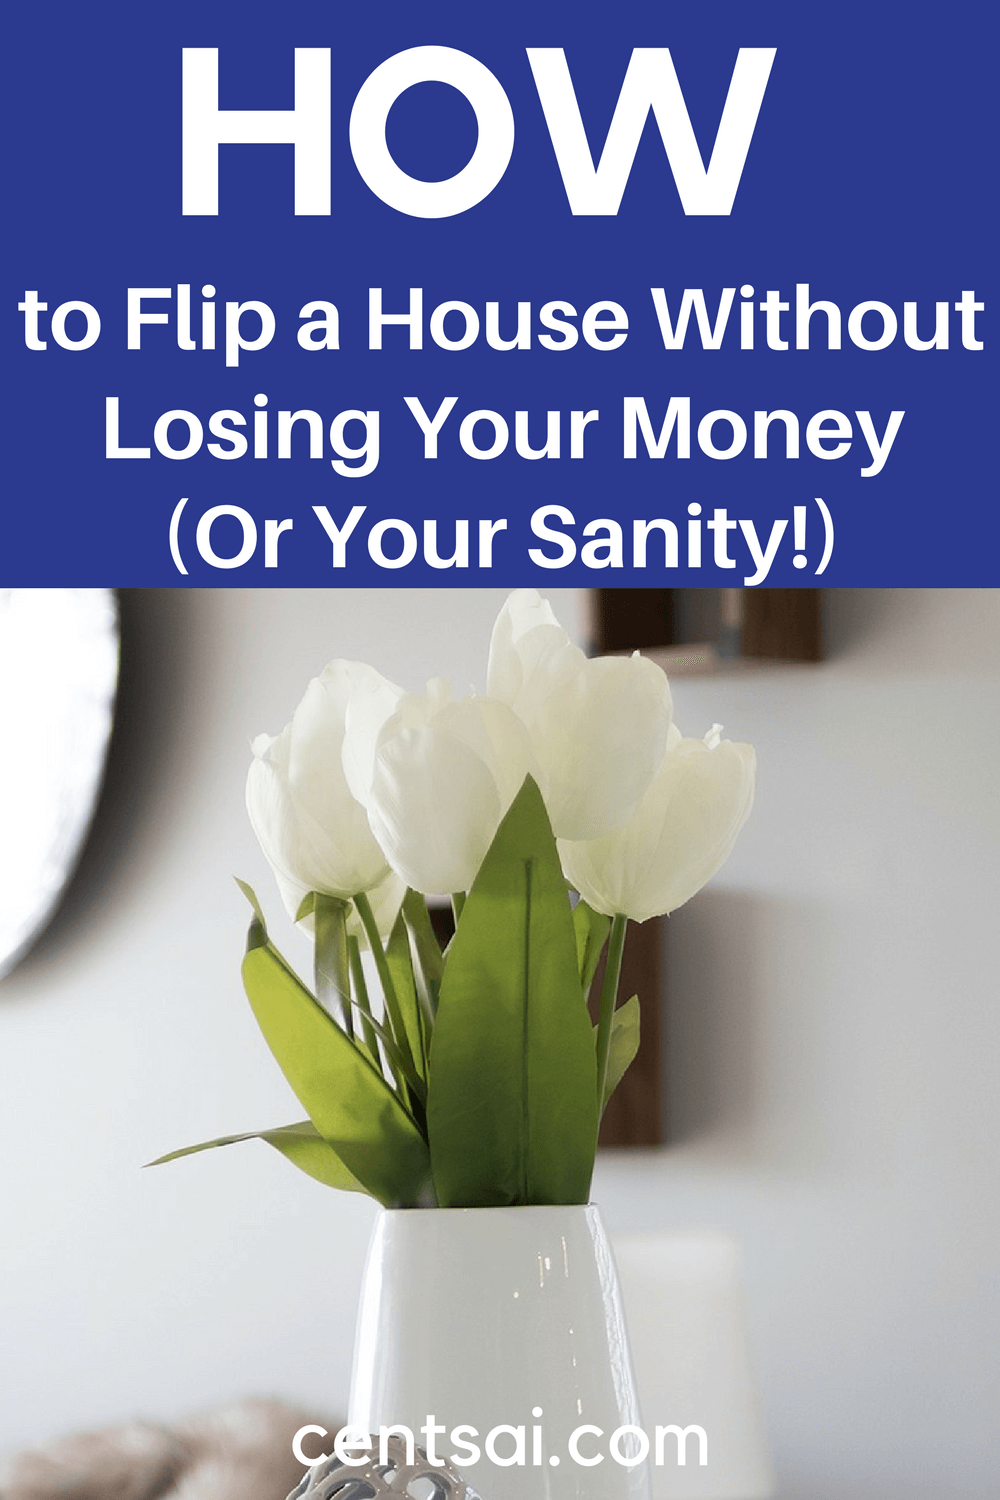 How to Flip a House Without Losing Your Money (Or Your Sanity!)